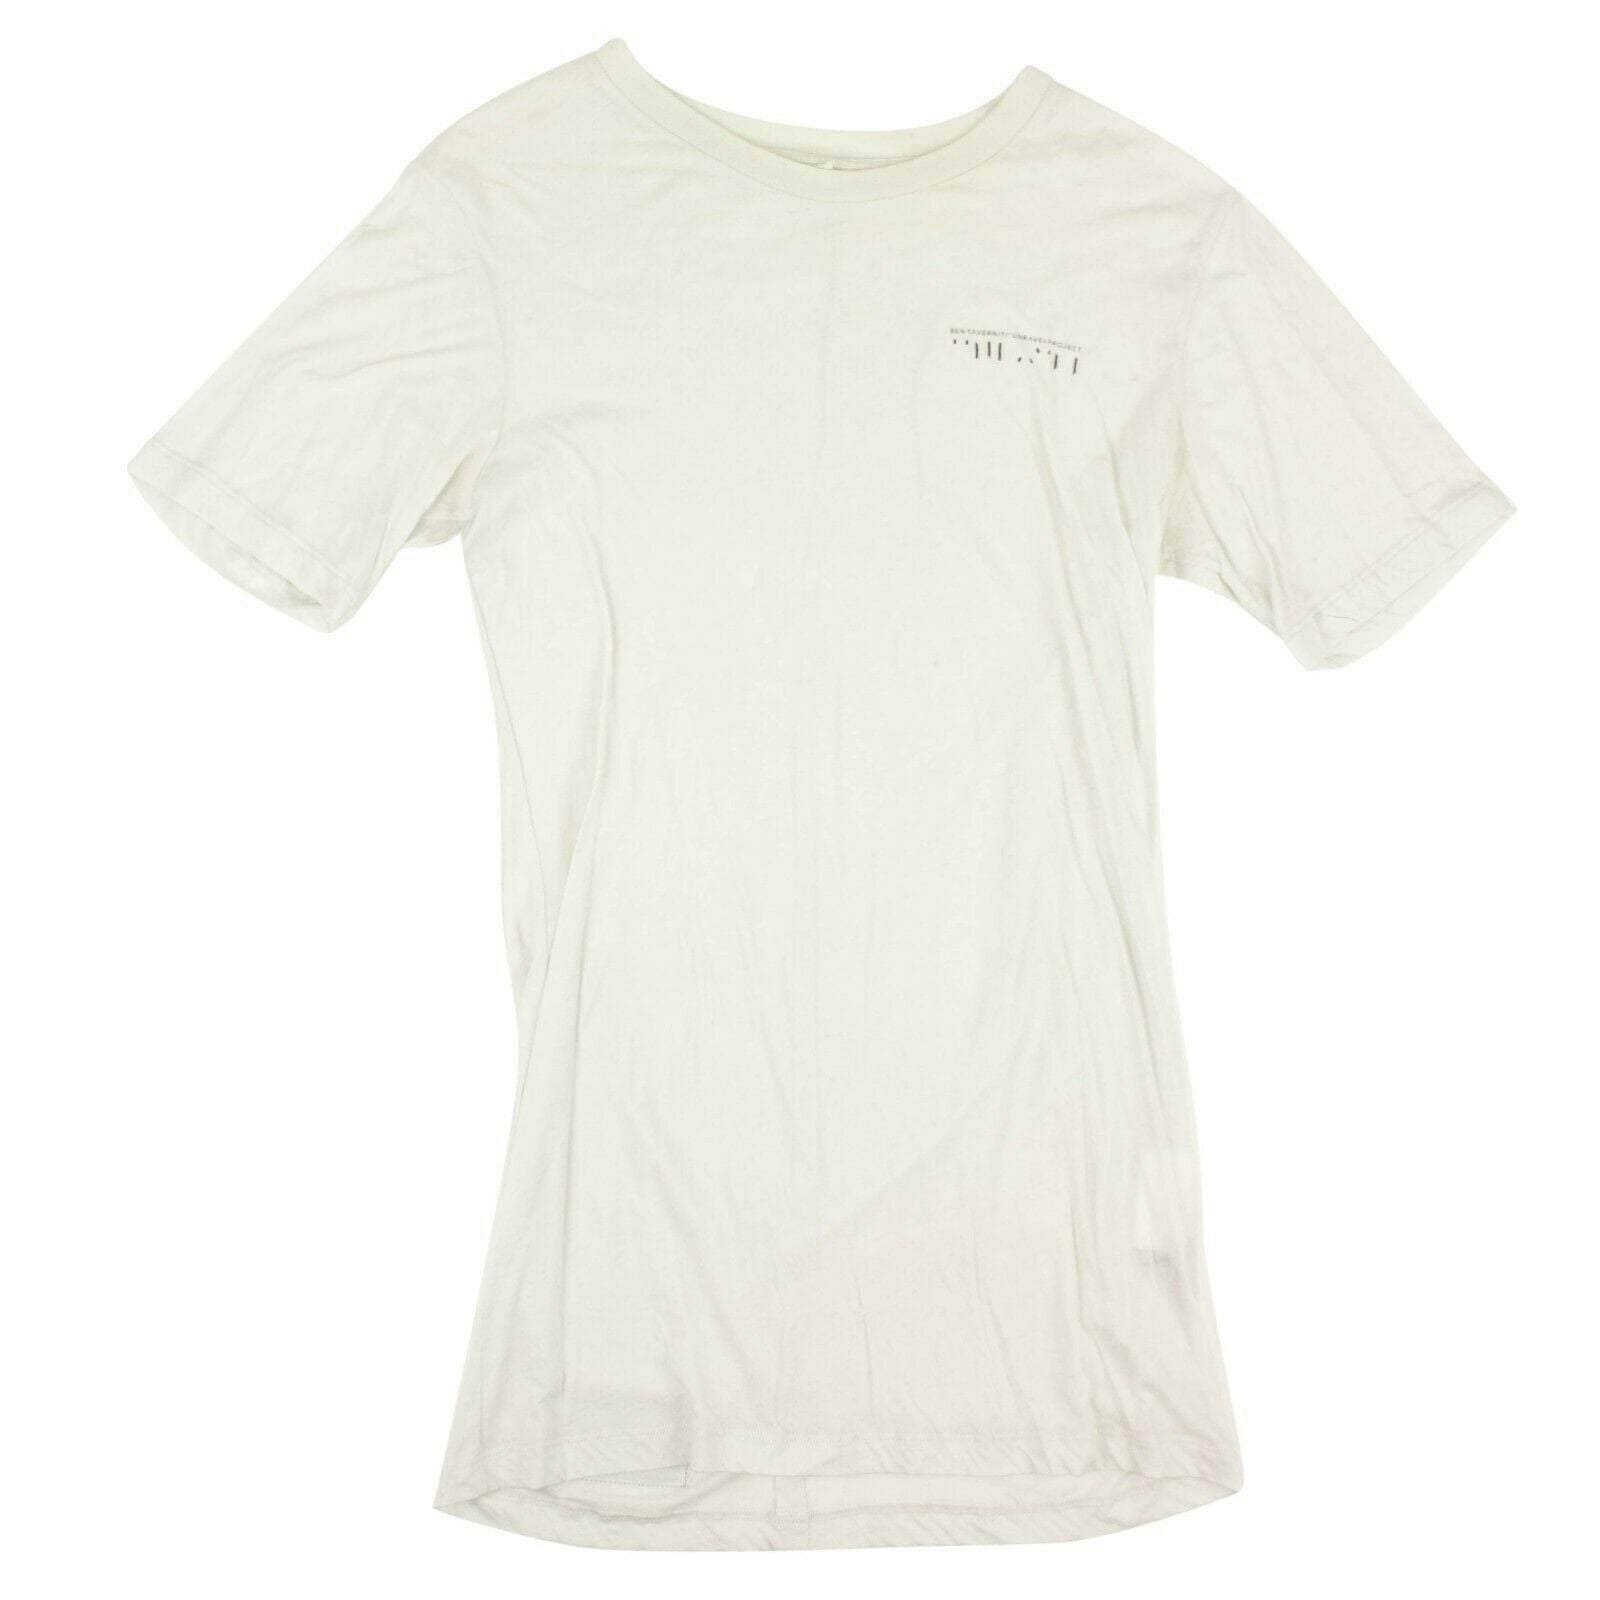 UNRAVEL PROJECT channelenable-all, couponcollection, gender-mens, main-clothing, size-l, size-m, under-250, unravel-project M Light Gray Logo Print T-Shirt 82NGG-UN-1007/M 82NGG-UN-1007/M